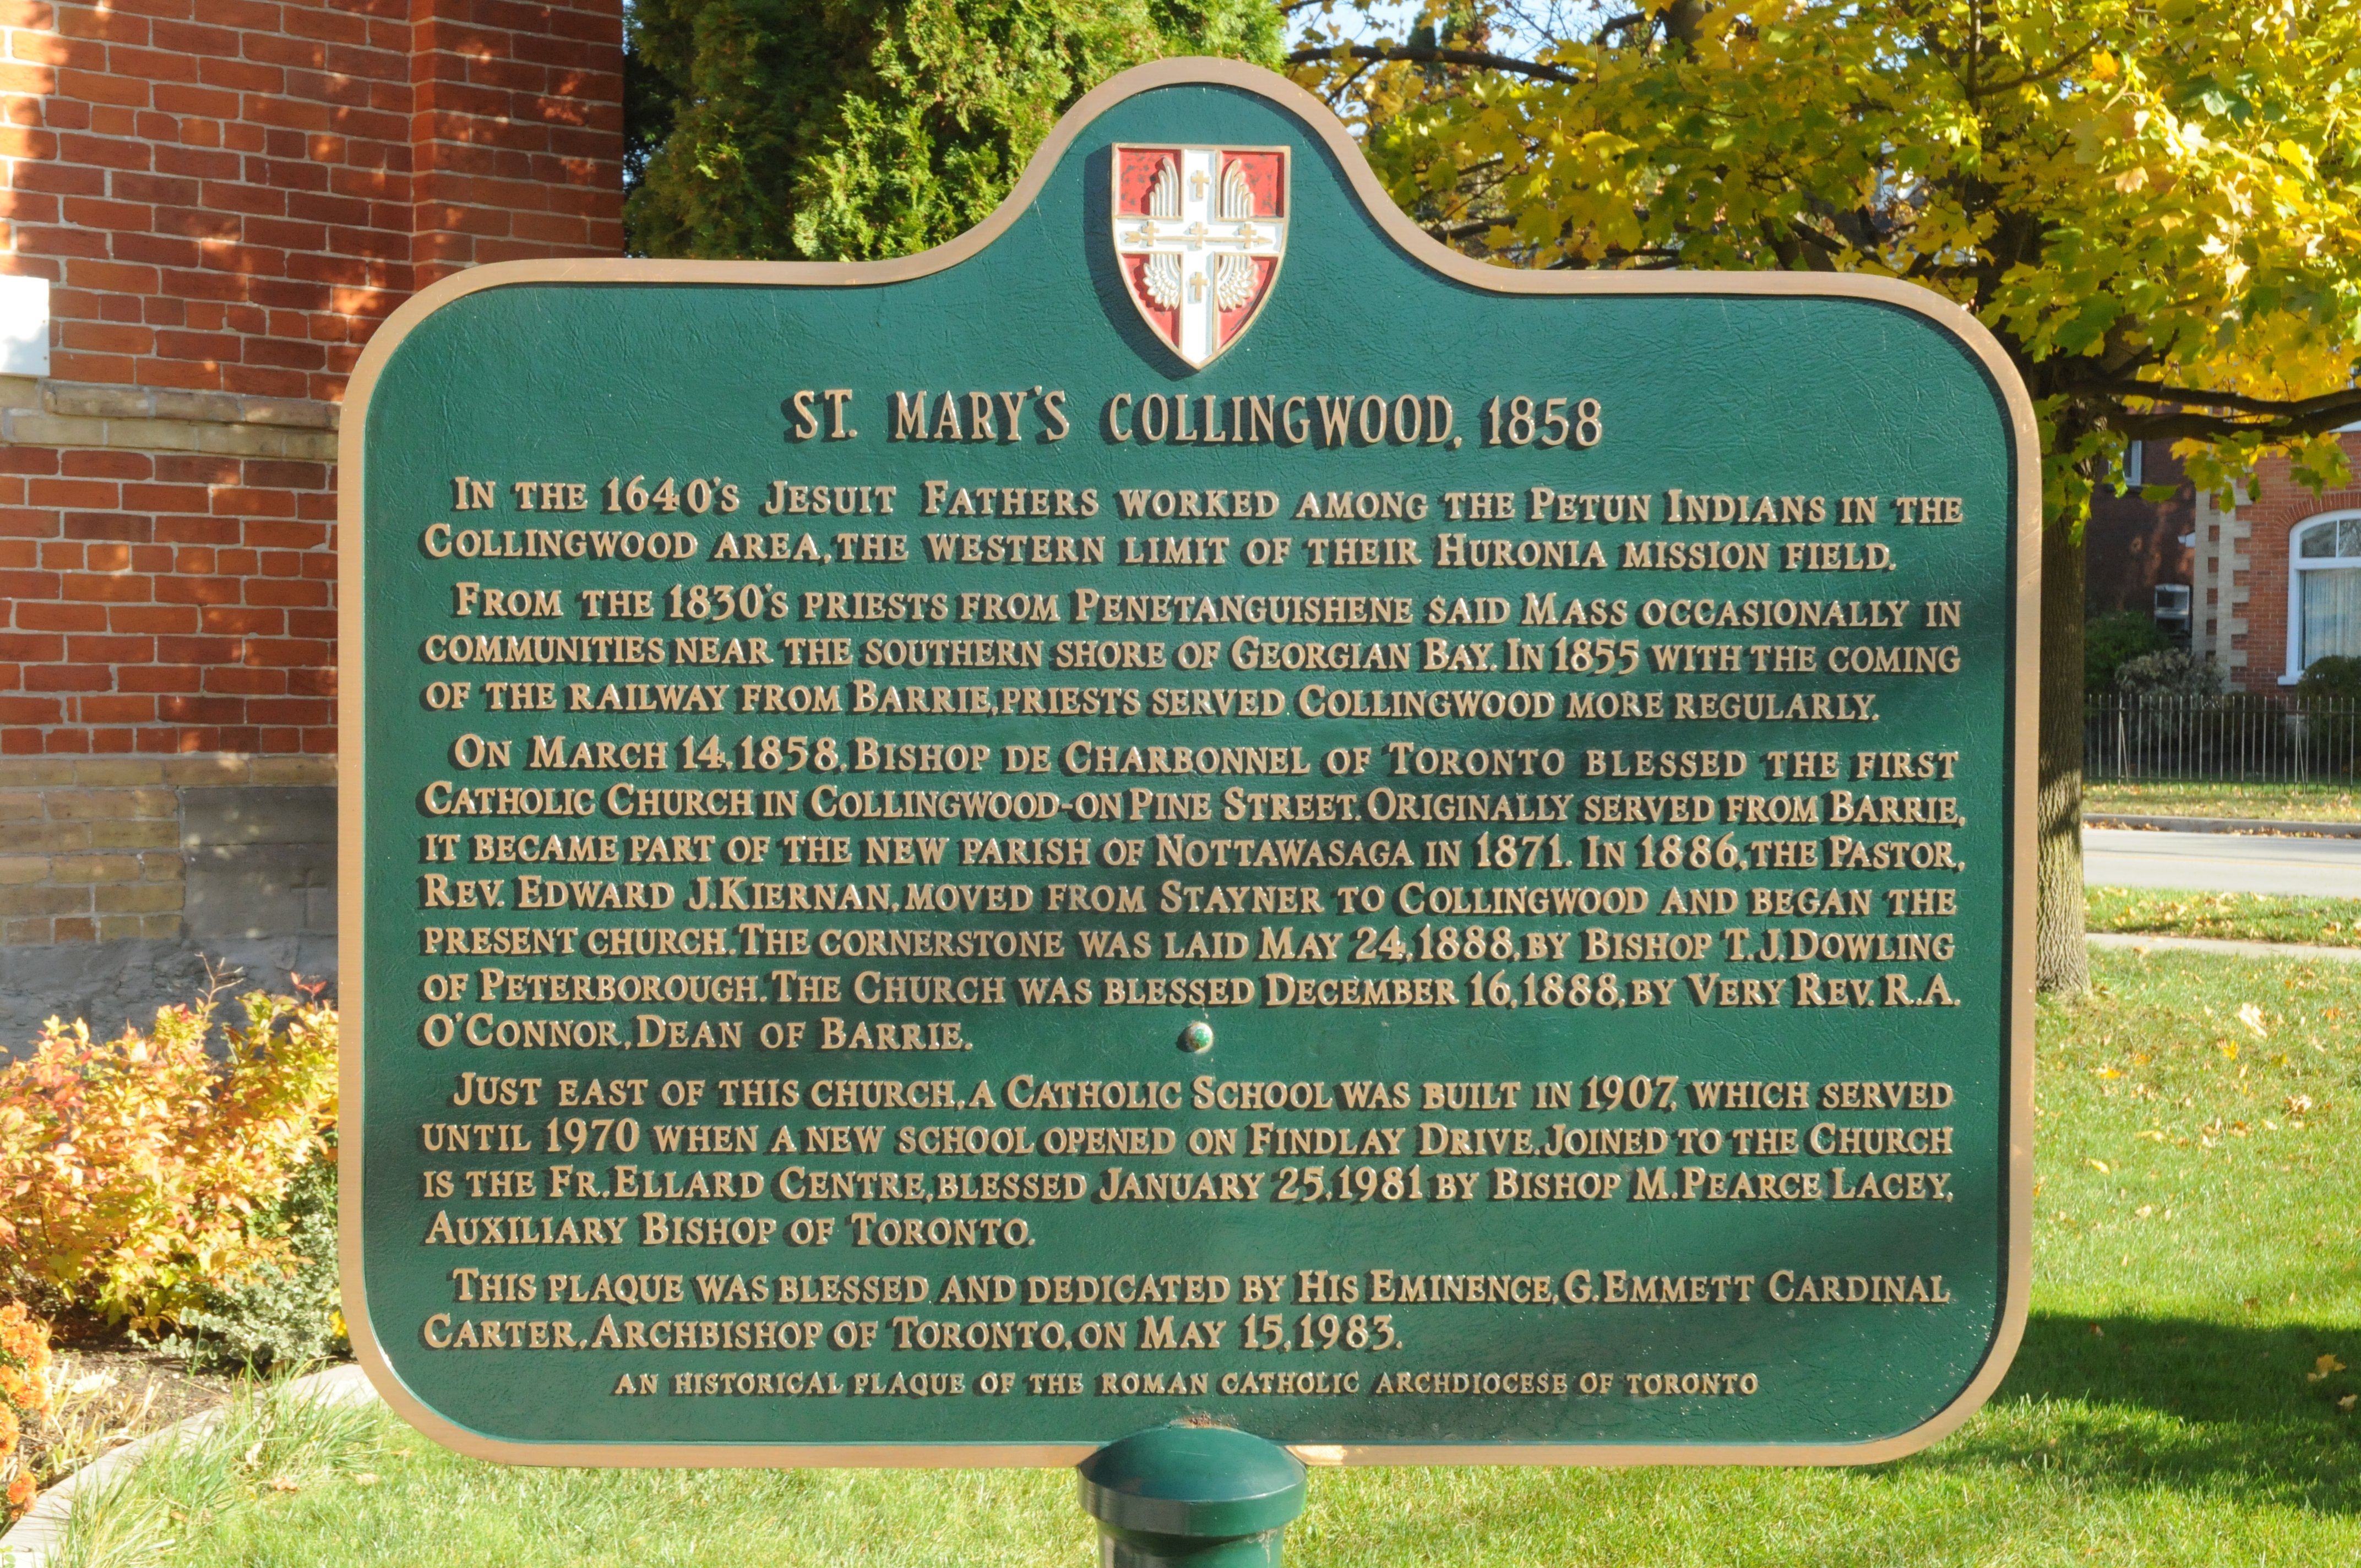 St. Mary's Collingwood 1858